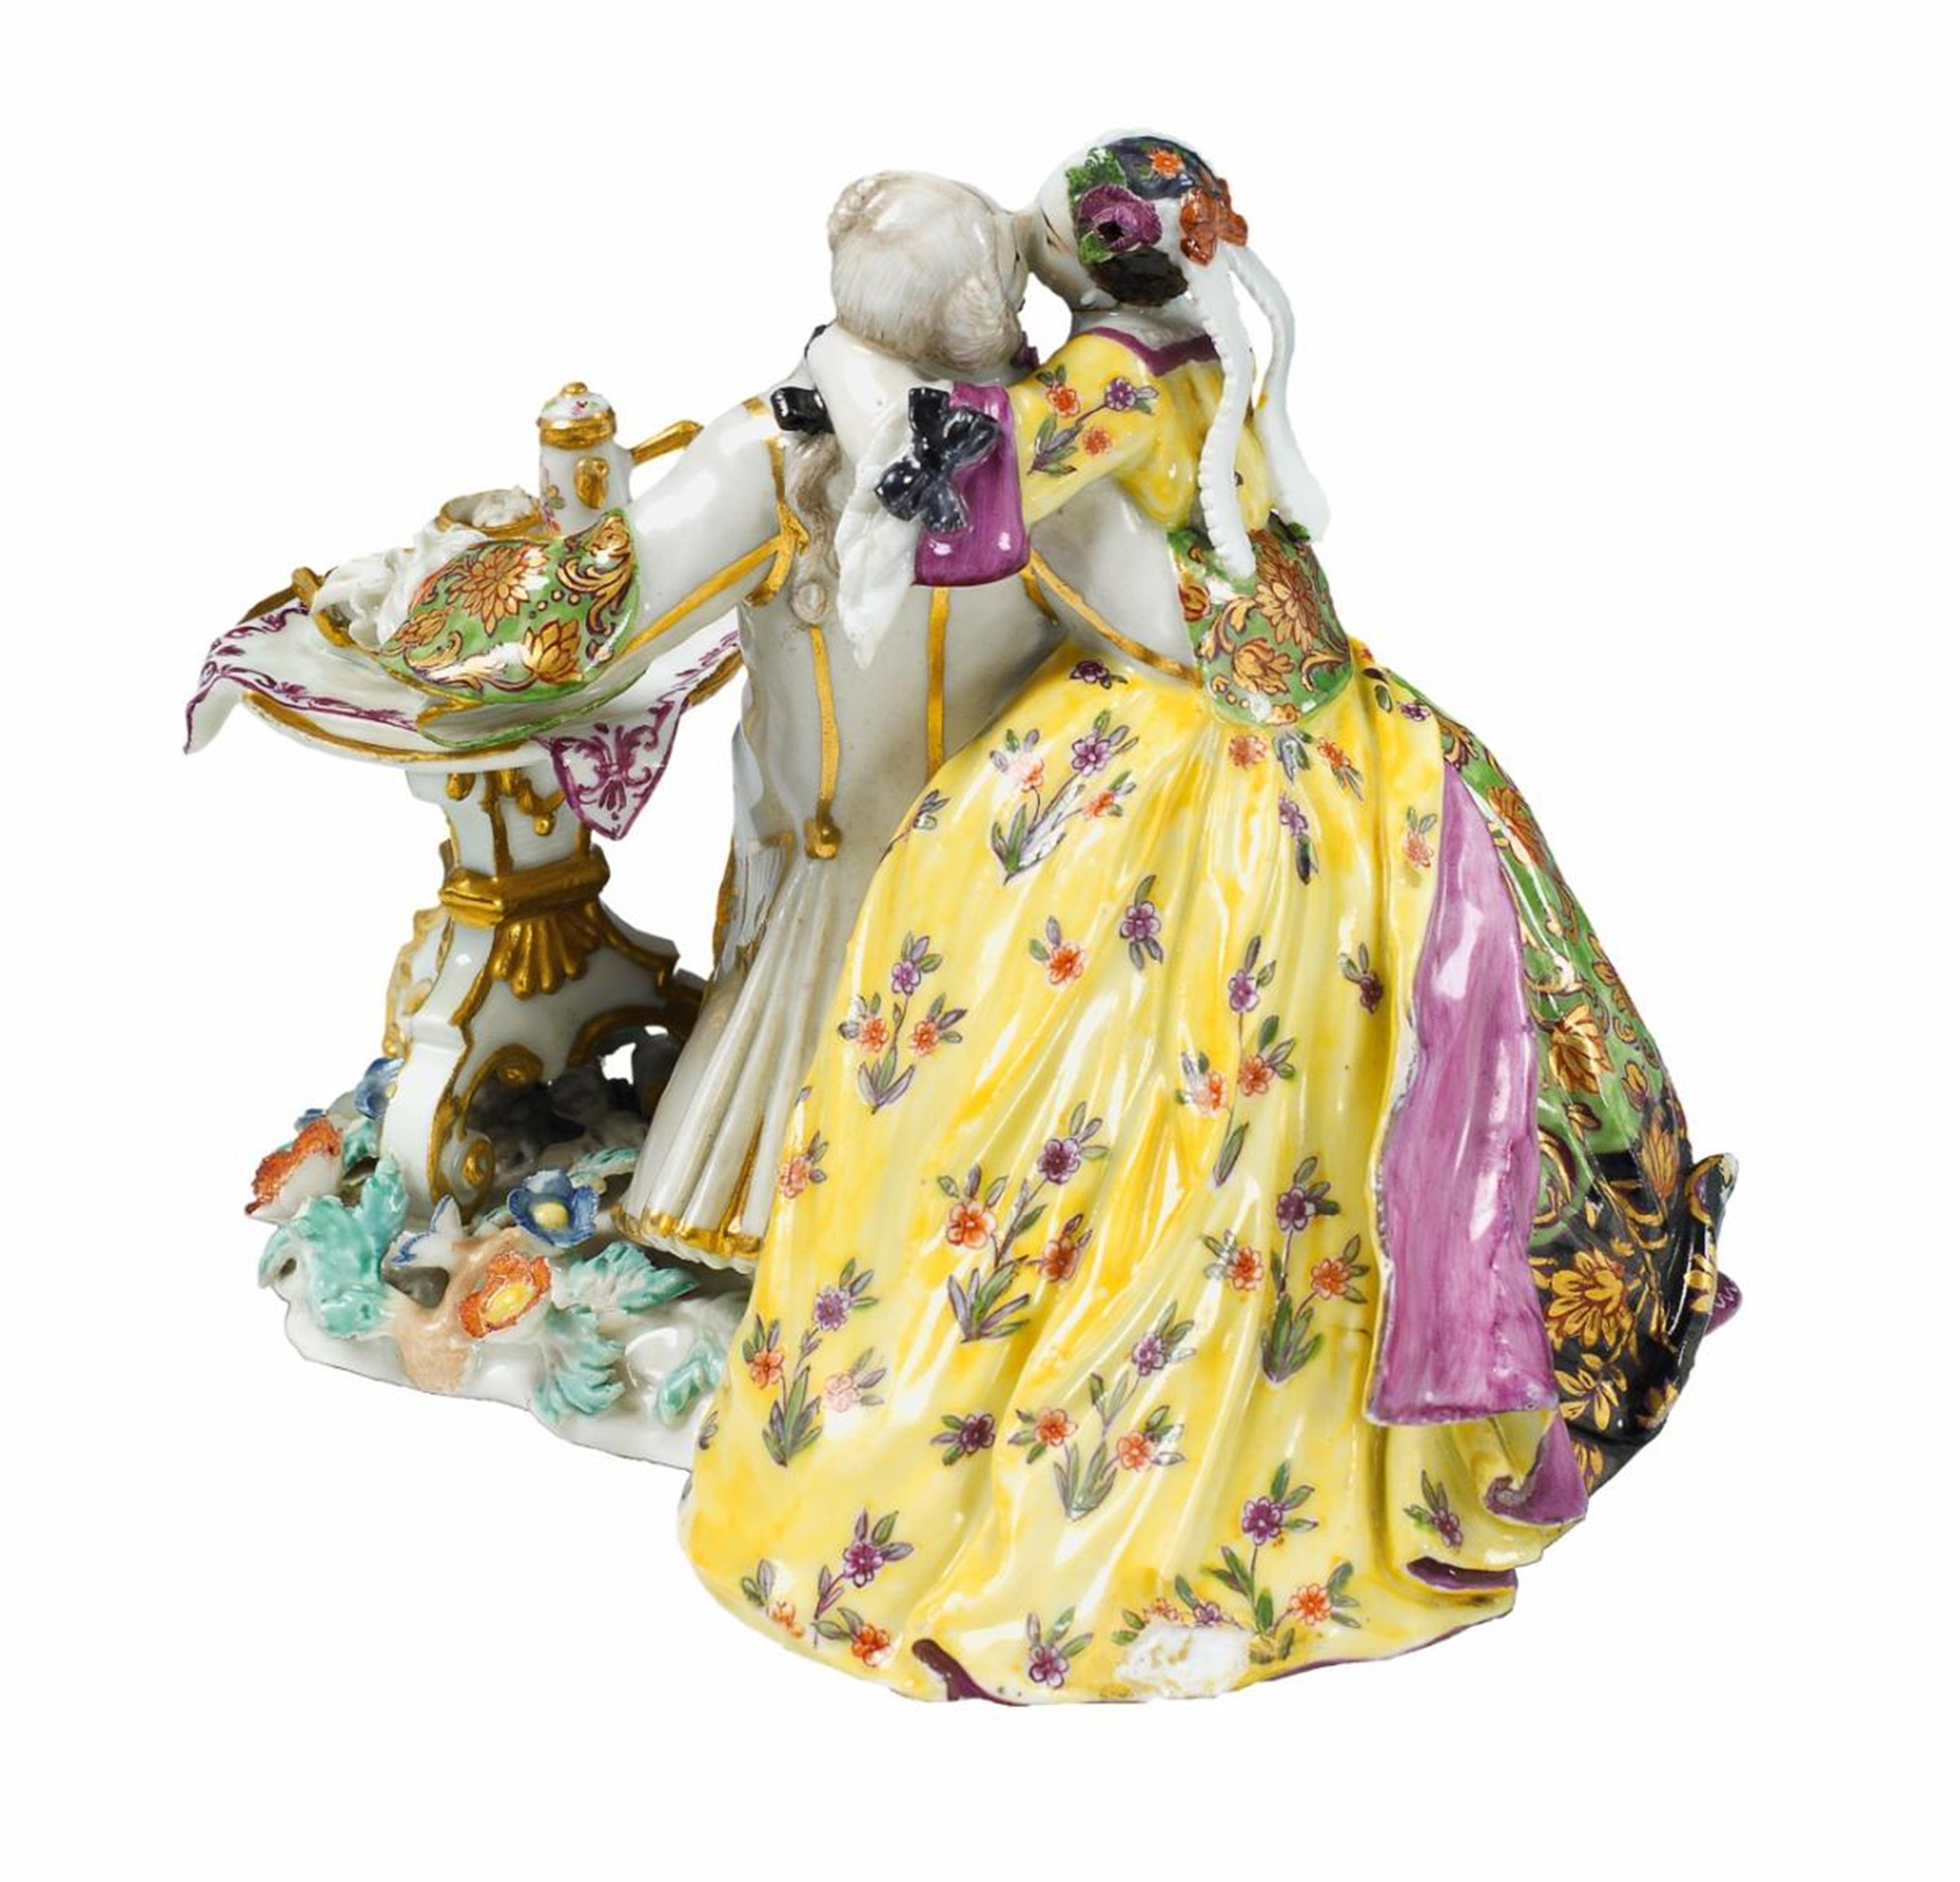 A rare Meissen group showing a finely dressed couple enjoying hot chocolate at a table on a floral base. Liebespaar bei der Schokolade - image-3